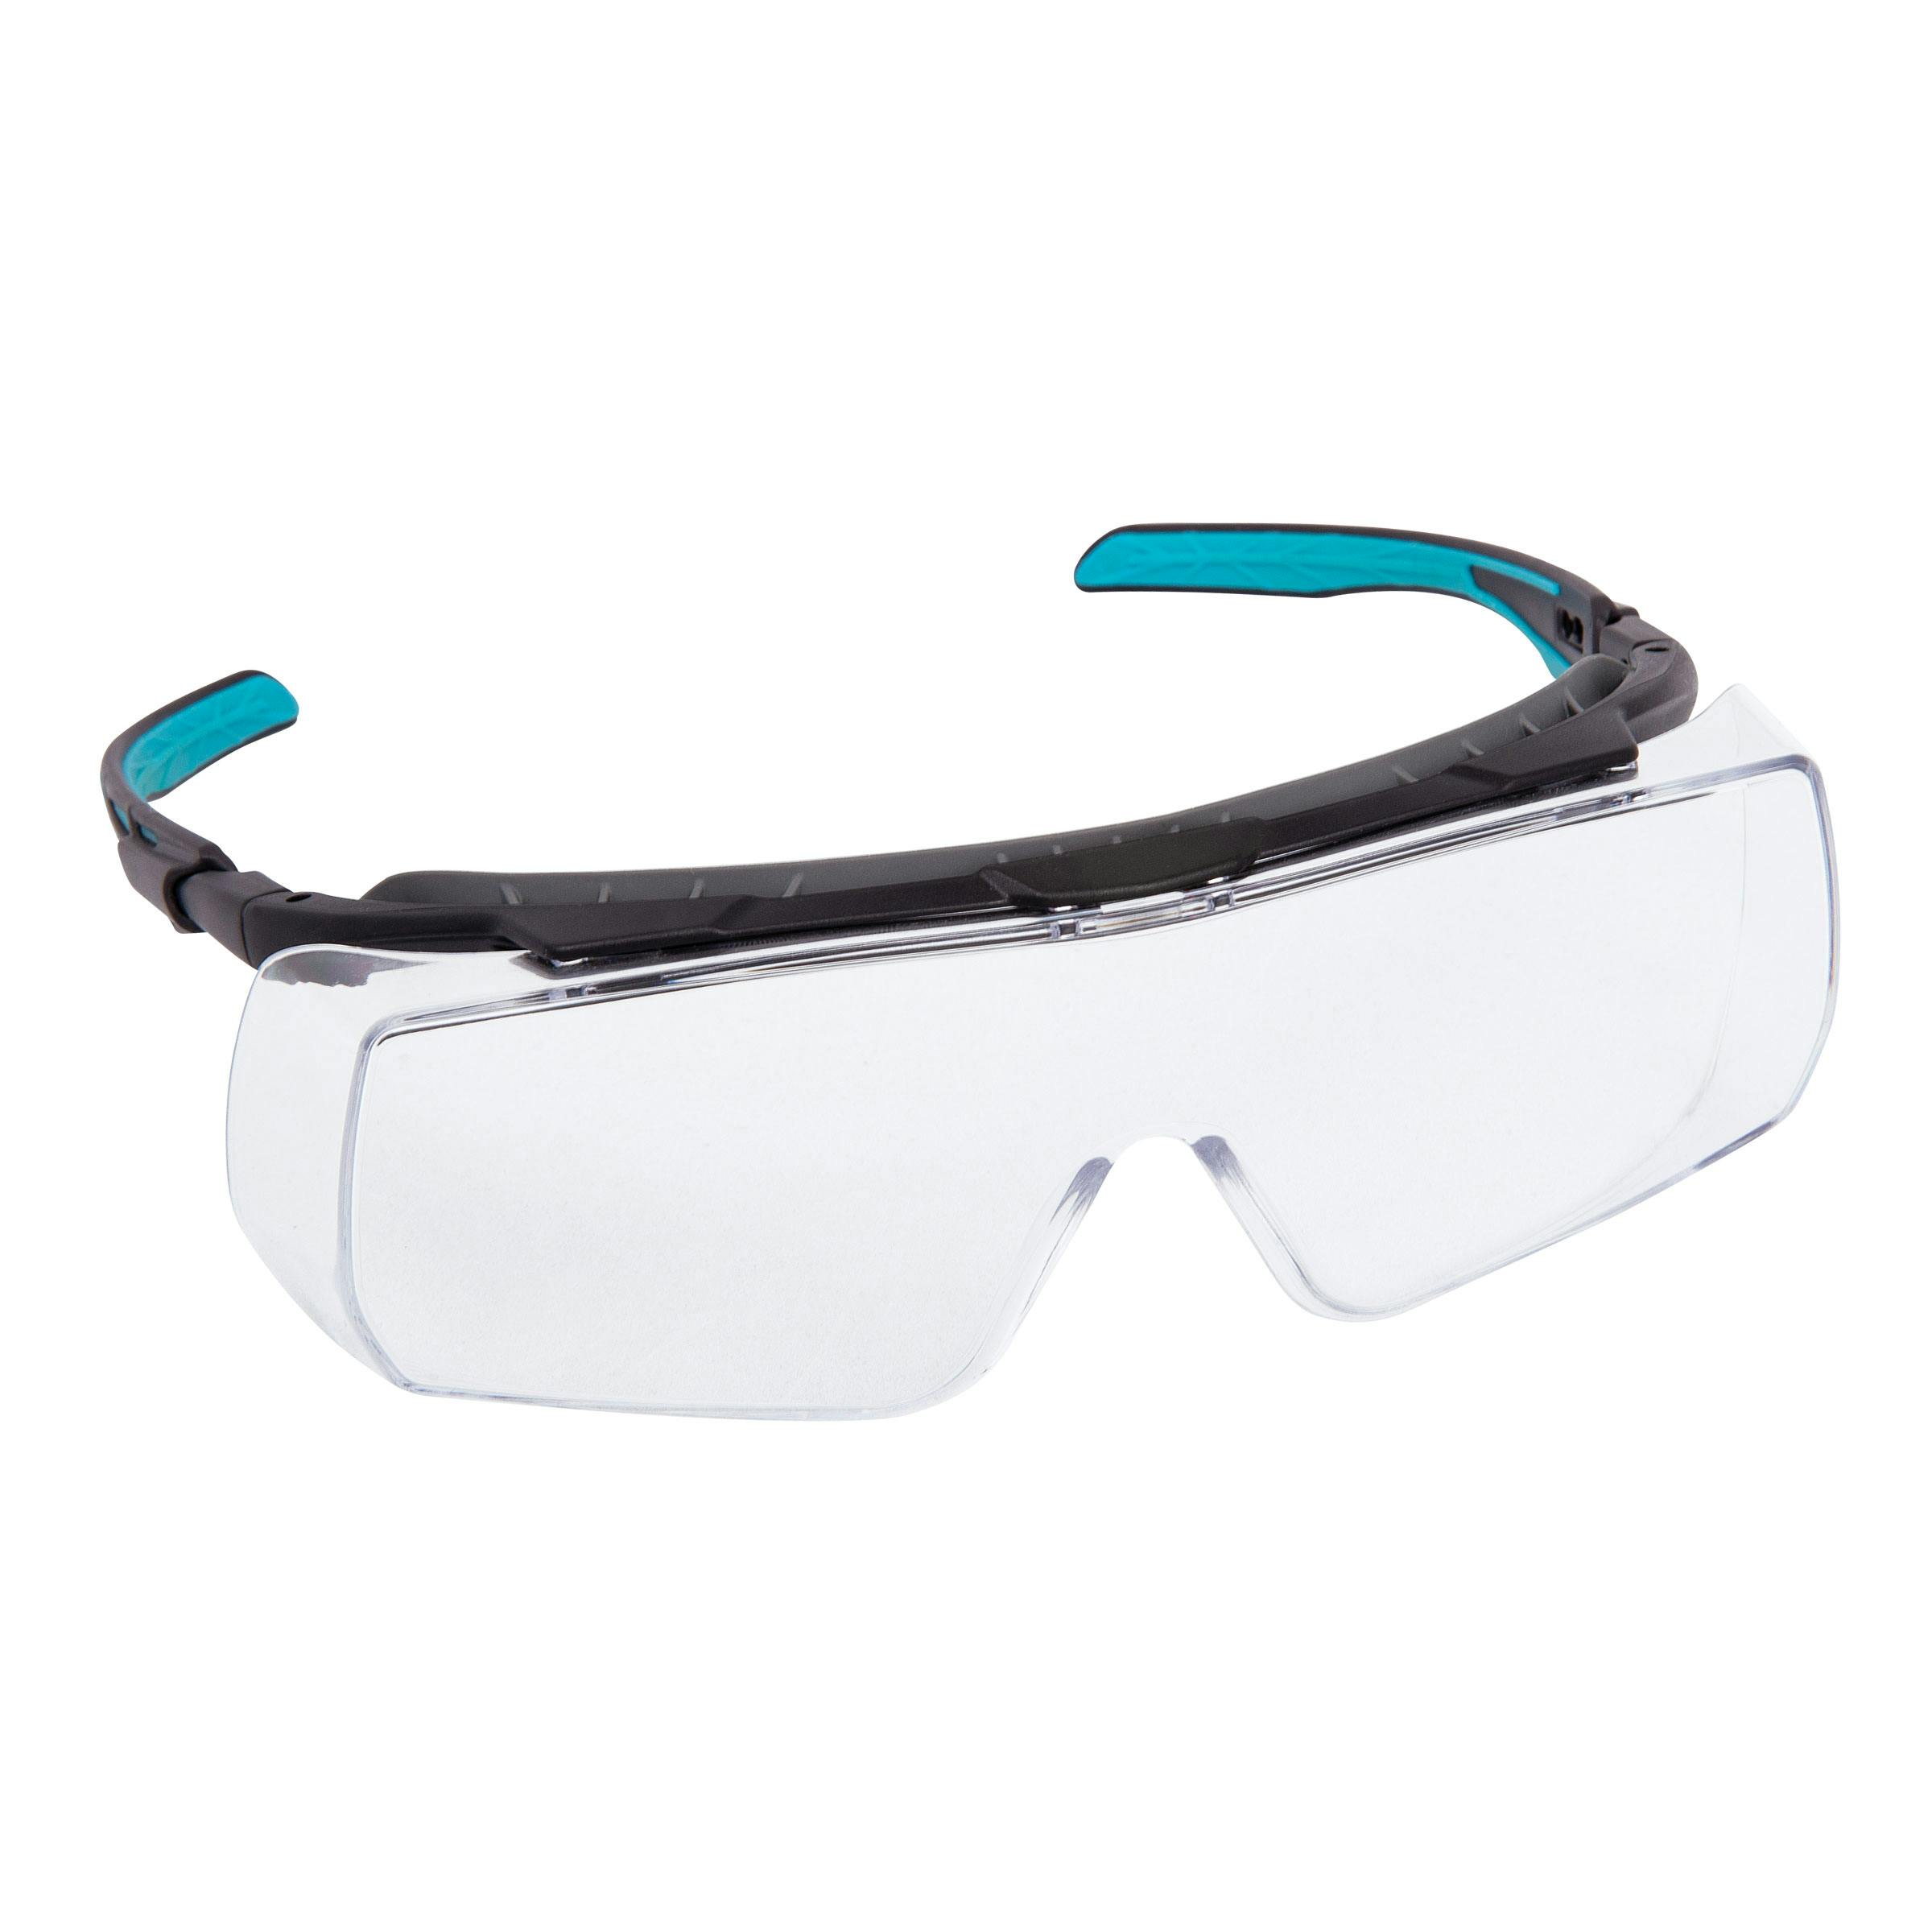 Force360 OTG Safety Spectacle